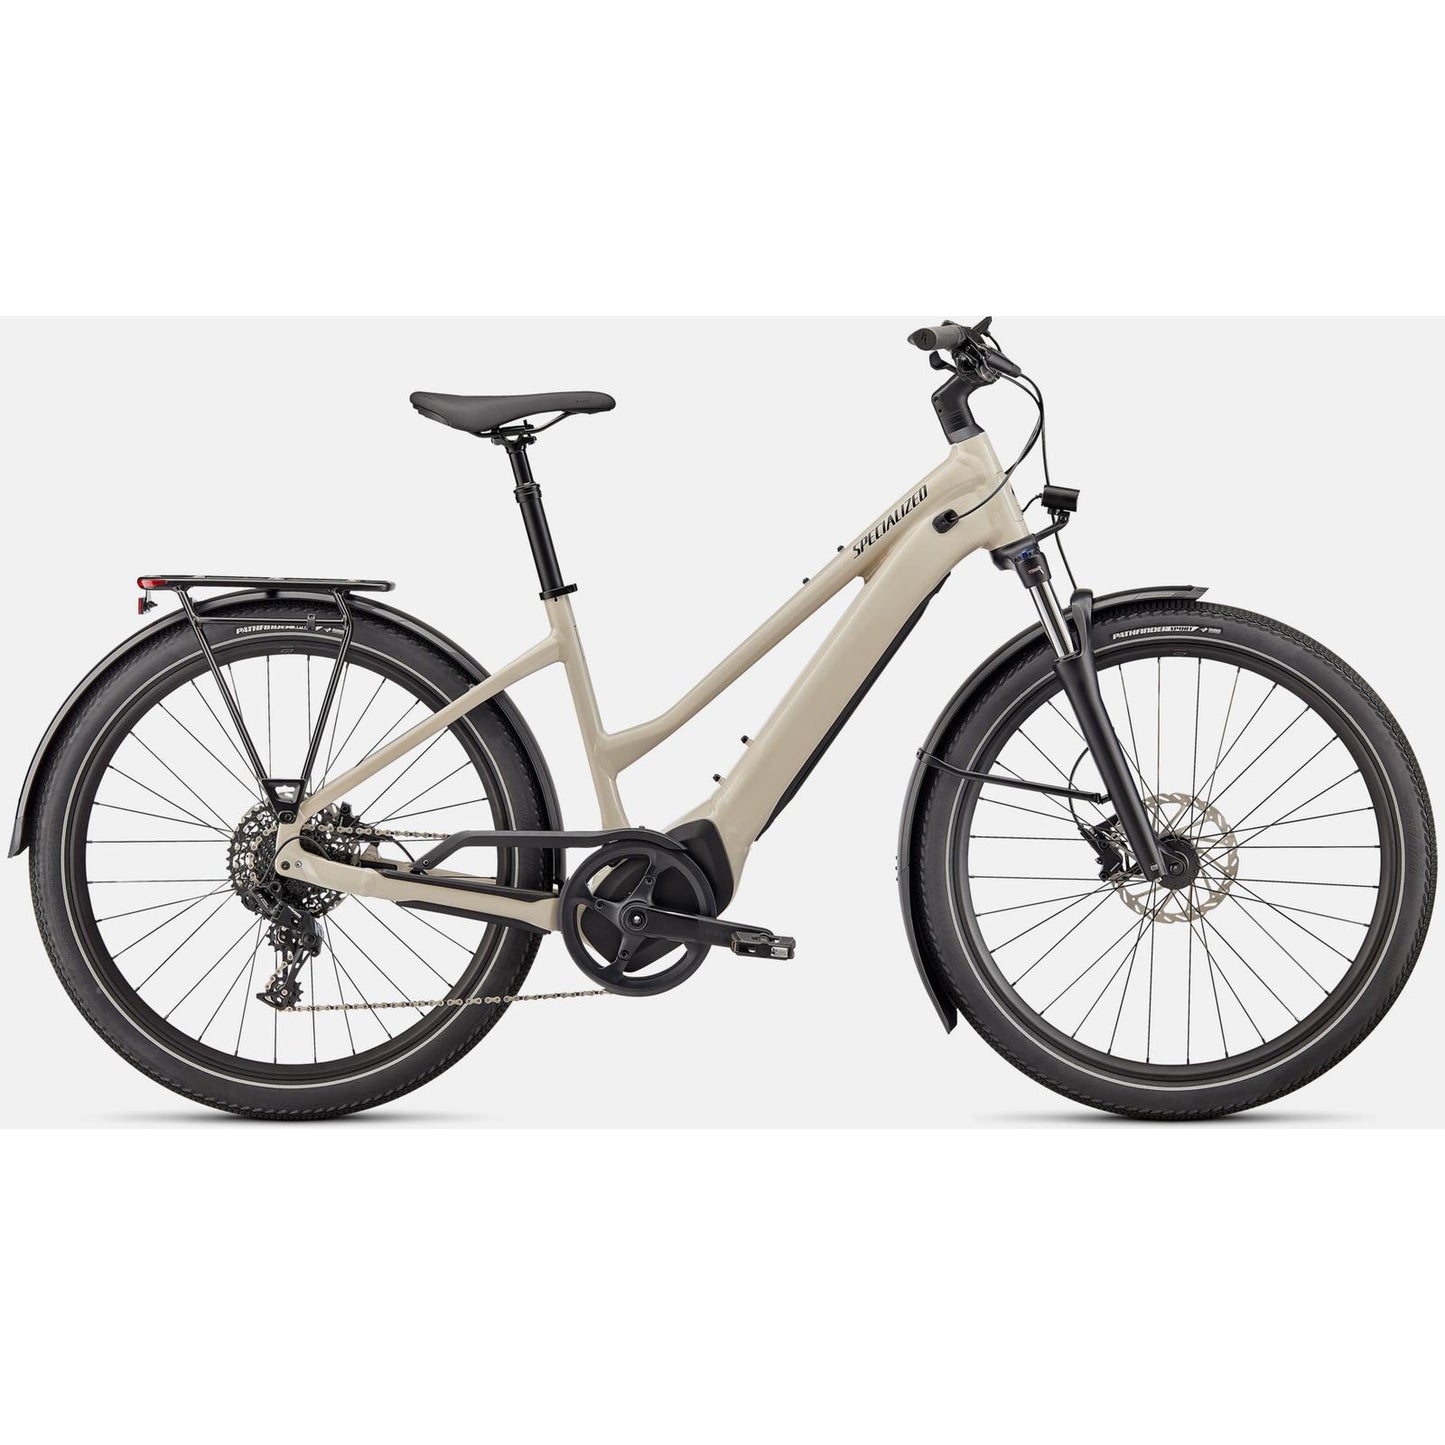 Specialized Turbo Vado 4.0 Step Through Electric Bike - Bikes - Bicycle Warehouse